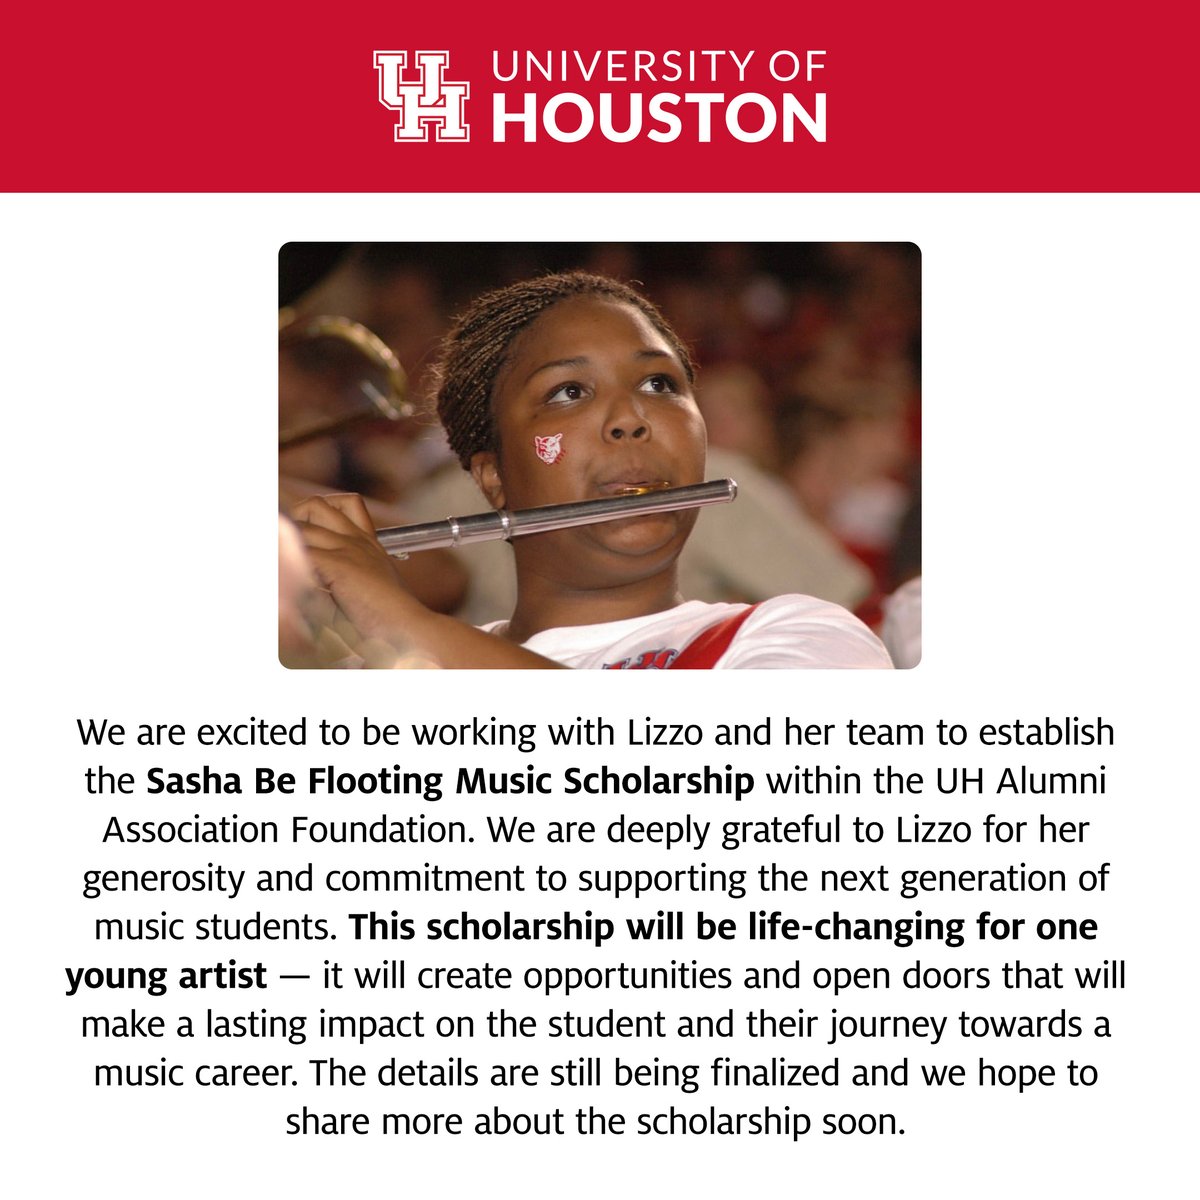 We are excited to be working with @lizzo and her team to establish the Sasha Be Flooting Music Scholarship within the UH Alumni Association Foundation. The details are still being finalized and we hope to share more about the scholarship soon.